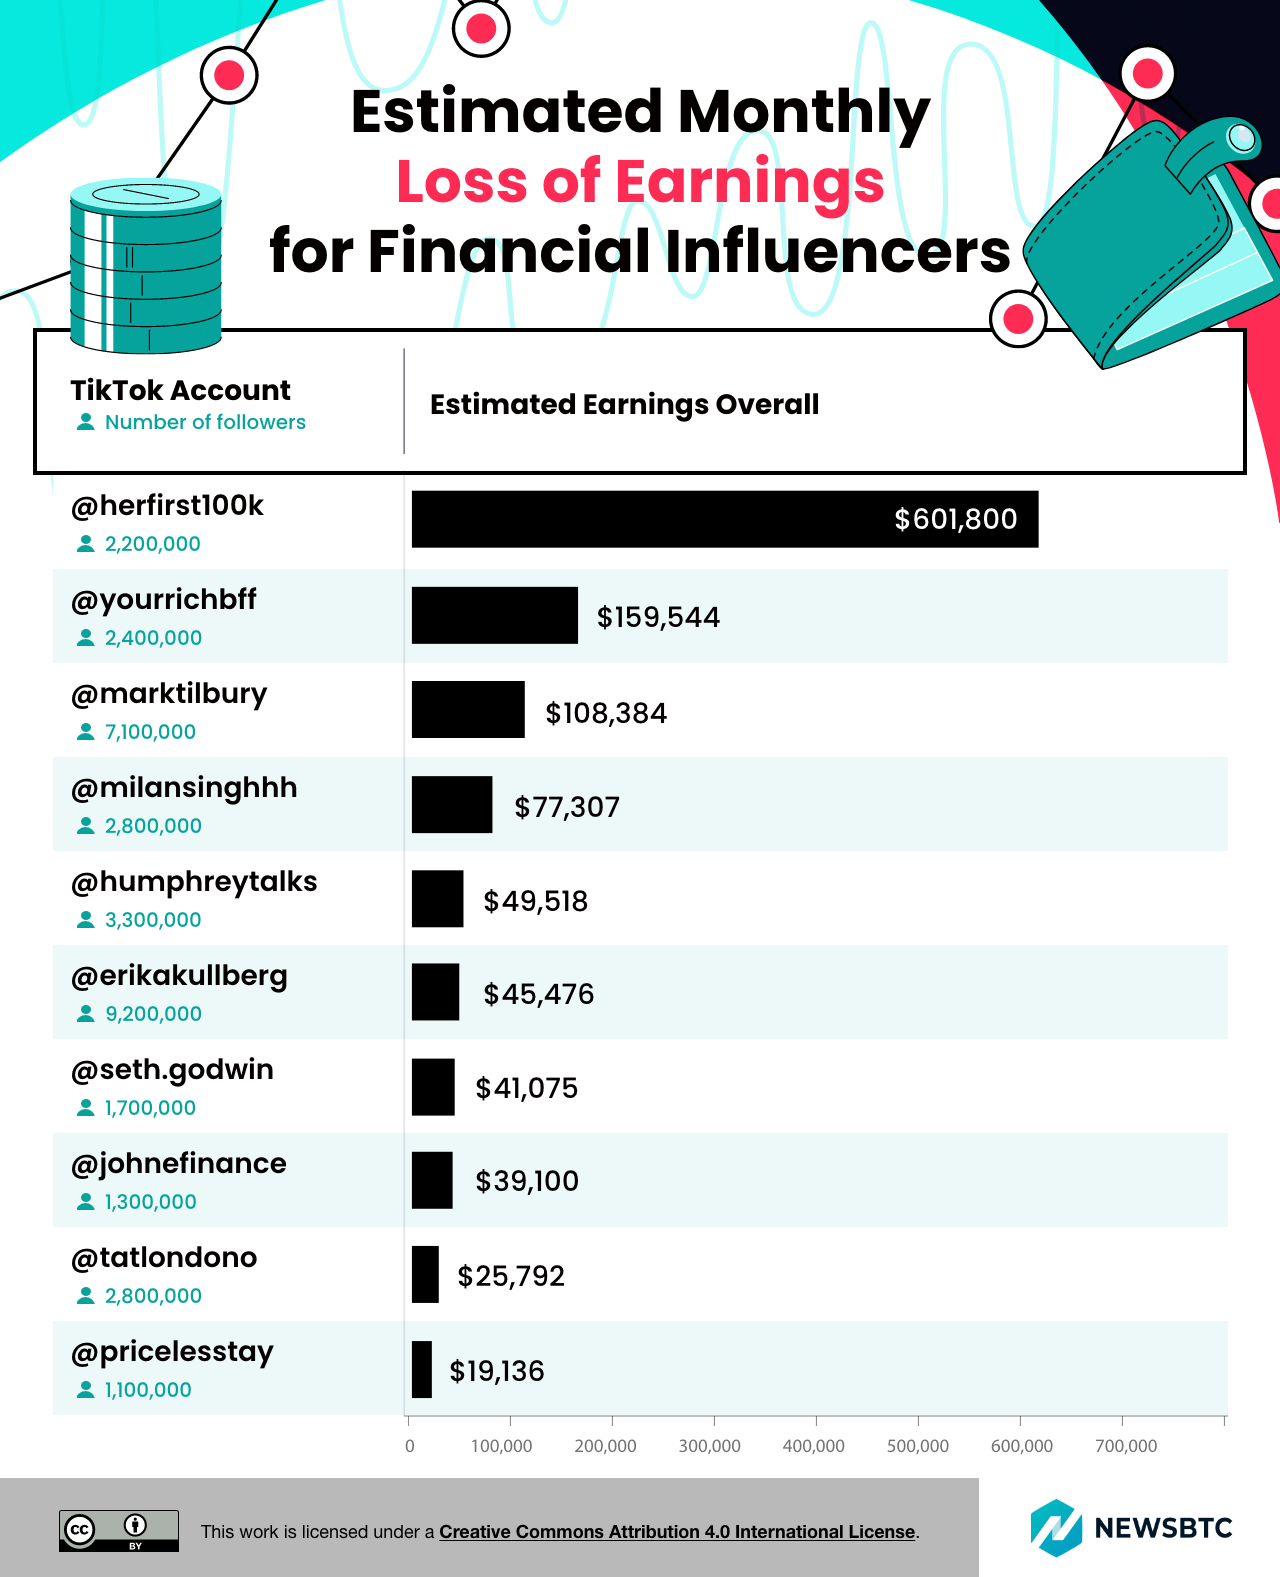 Estimated monthly loss of earnings for financial influencers